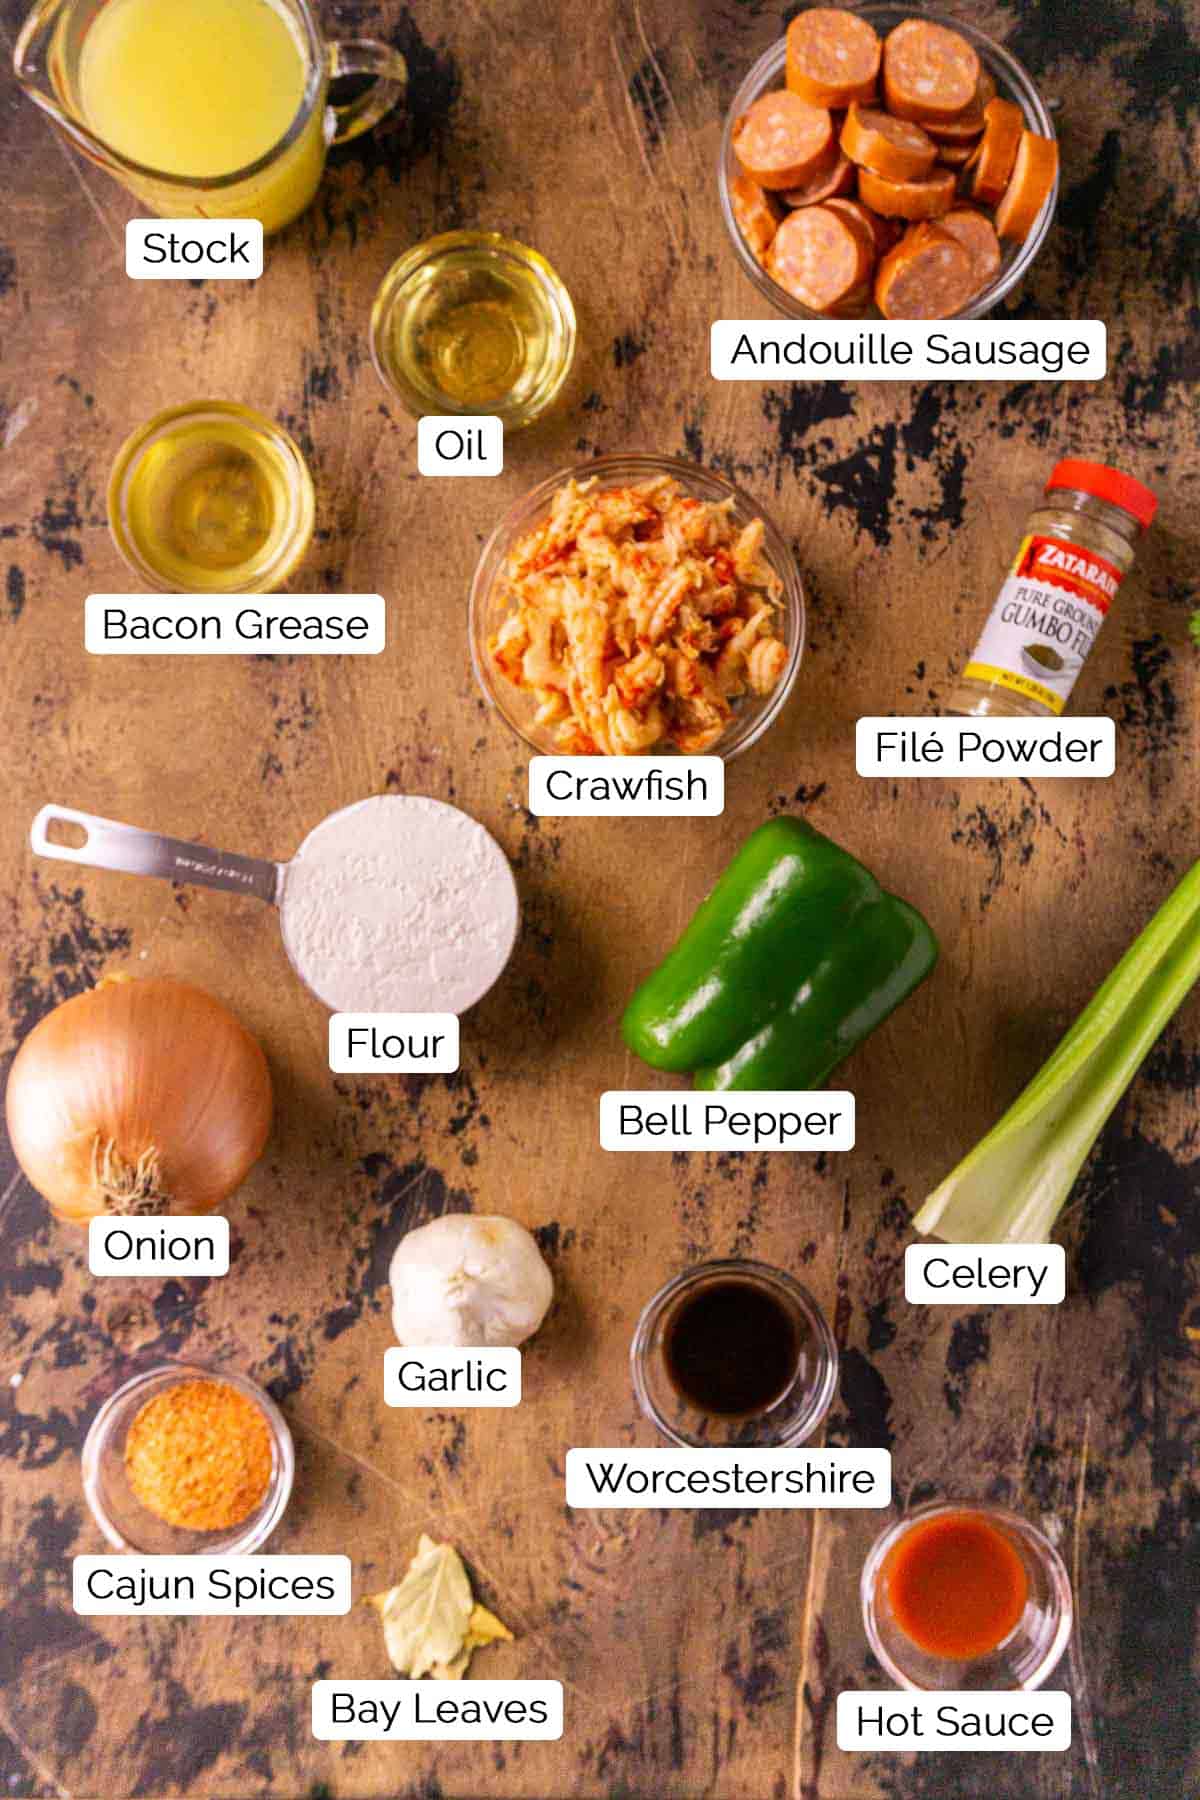 The gumbo ingredients on a rustic wooden board with black and white labels by each item.